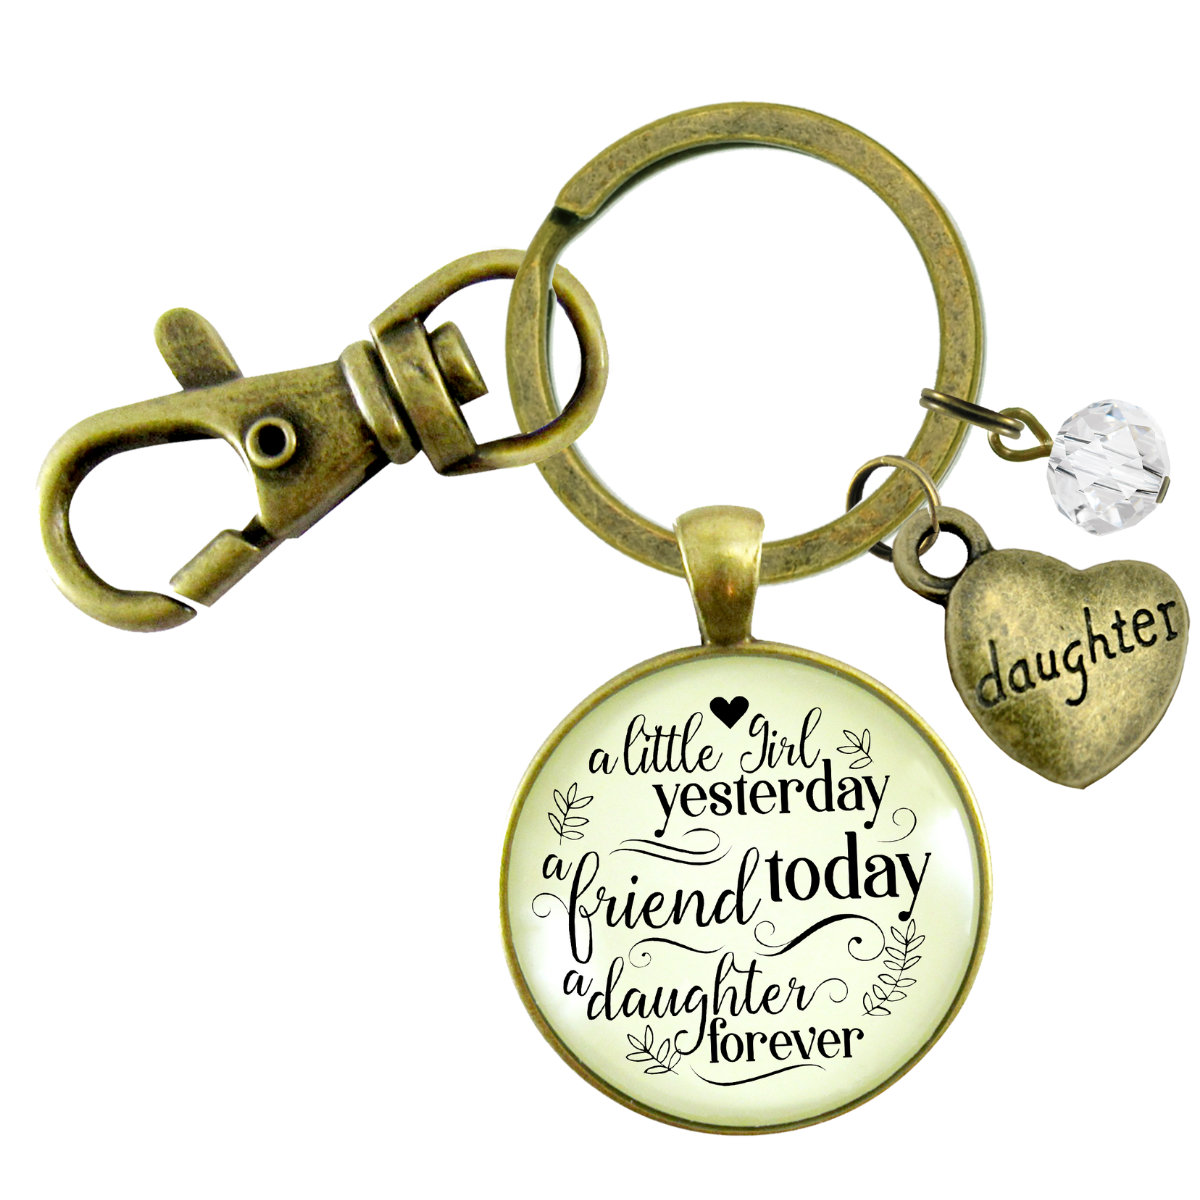 Dad Daughter Keychain A Little Girl Yesterday A Friend Today Keepsake Jewelry From Father Gift - Gutsy Goodness Handmade Jewelry;Dad Daughter Keychain A Little Girl Yesterday A Friend Today Keepsake Jewelry From Father Gift - Gutsy Goodness Handmade Jewelry Gifts